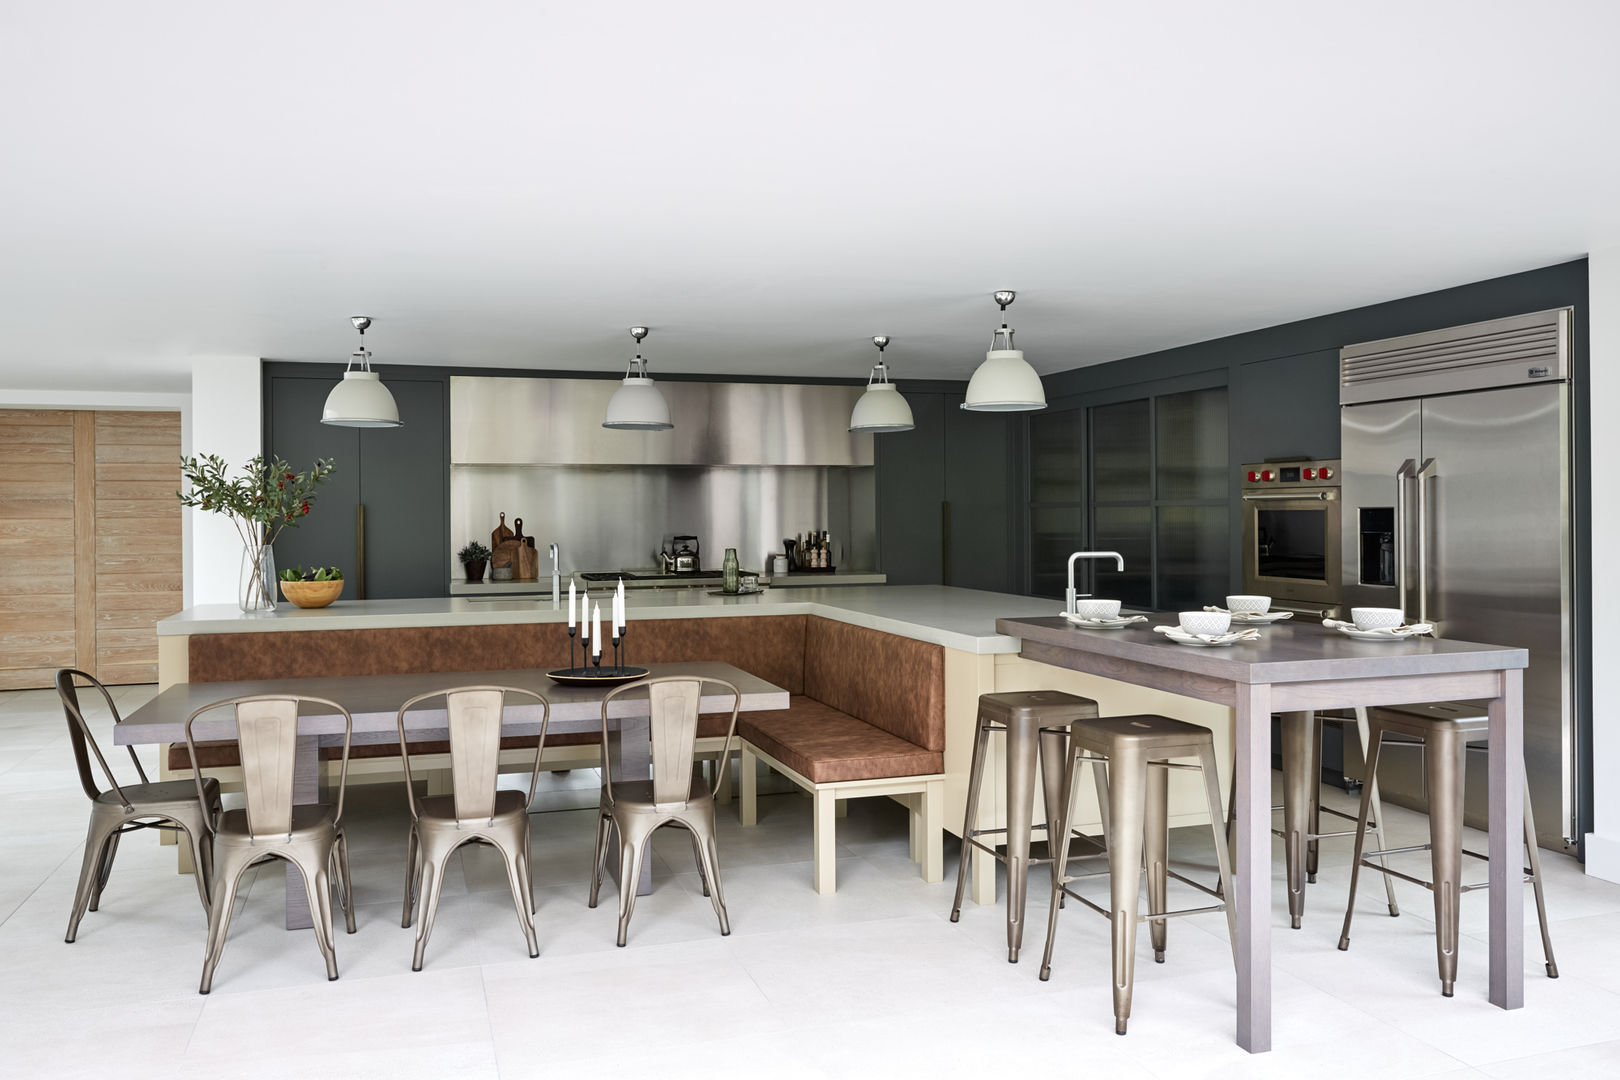 Two-Tone Harmony by Mowlem & Co, Mowlem&Co Mowlem&Co Built-in kitchens